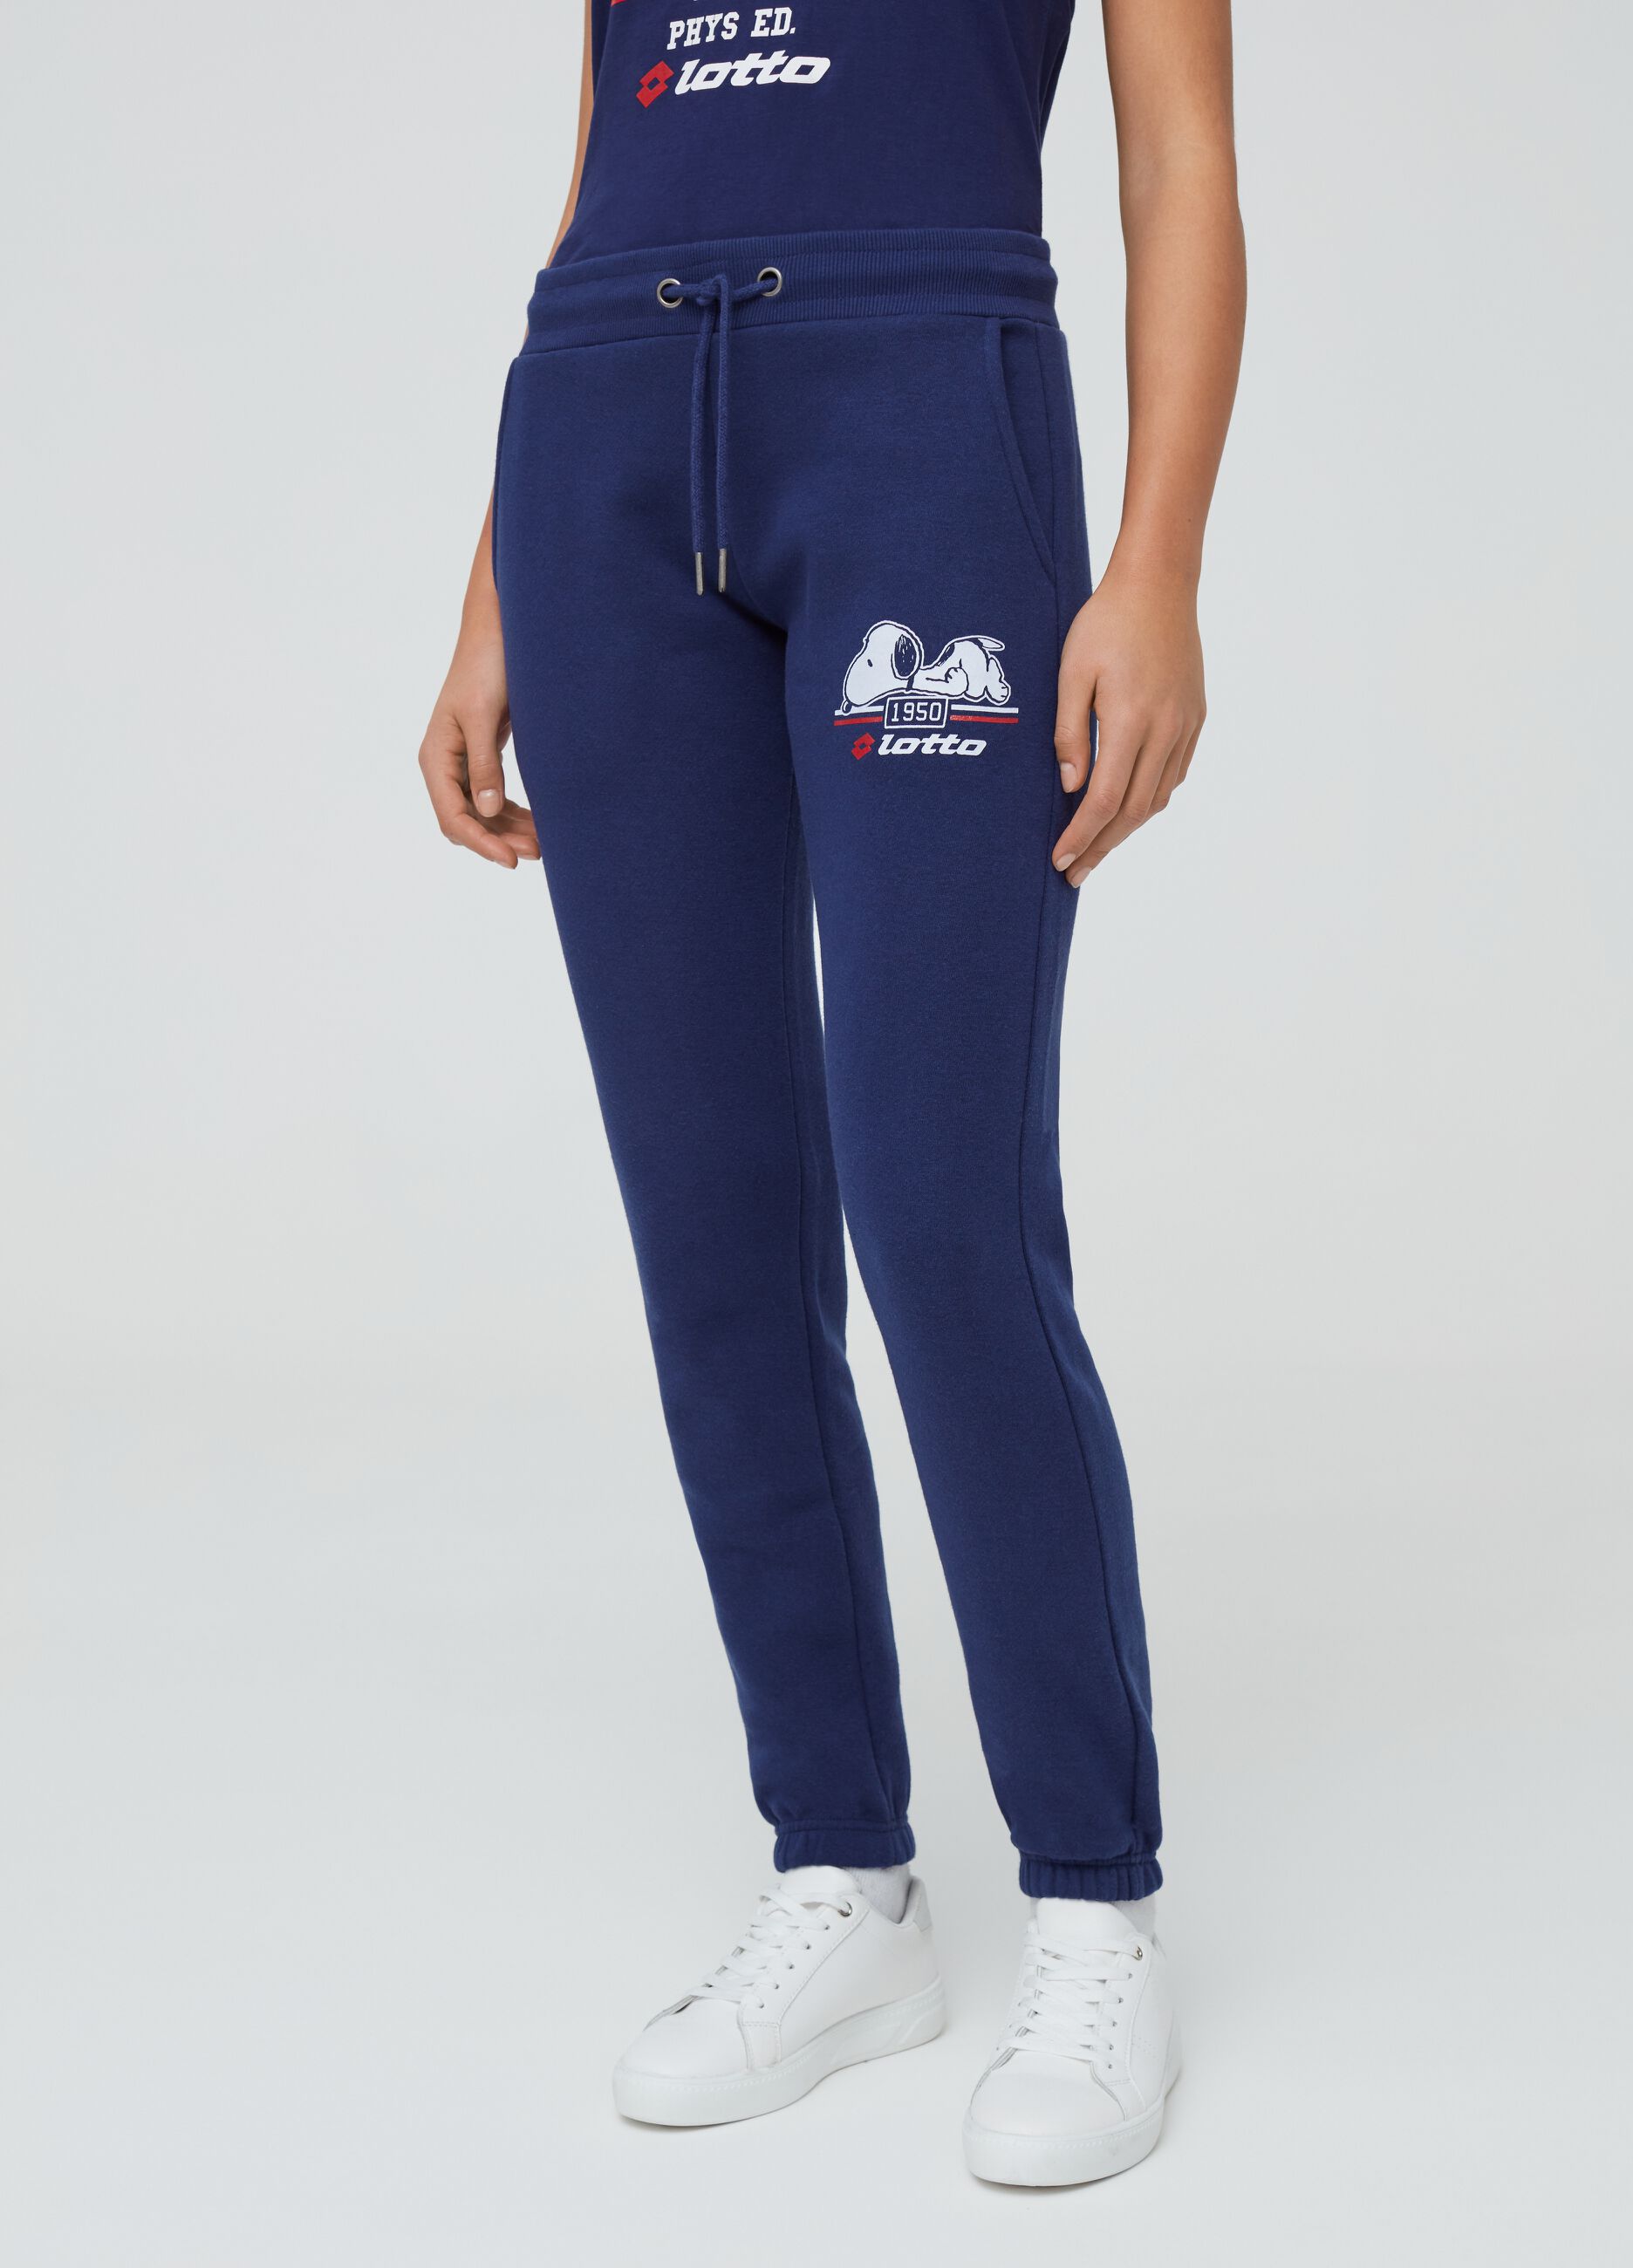 Lotto Peanuts Snoopy joggers with drawstring